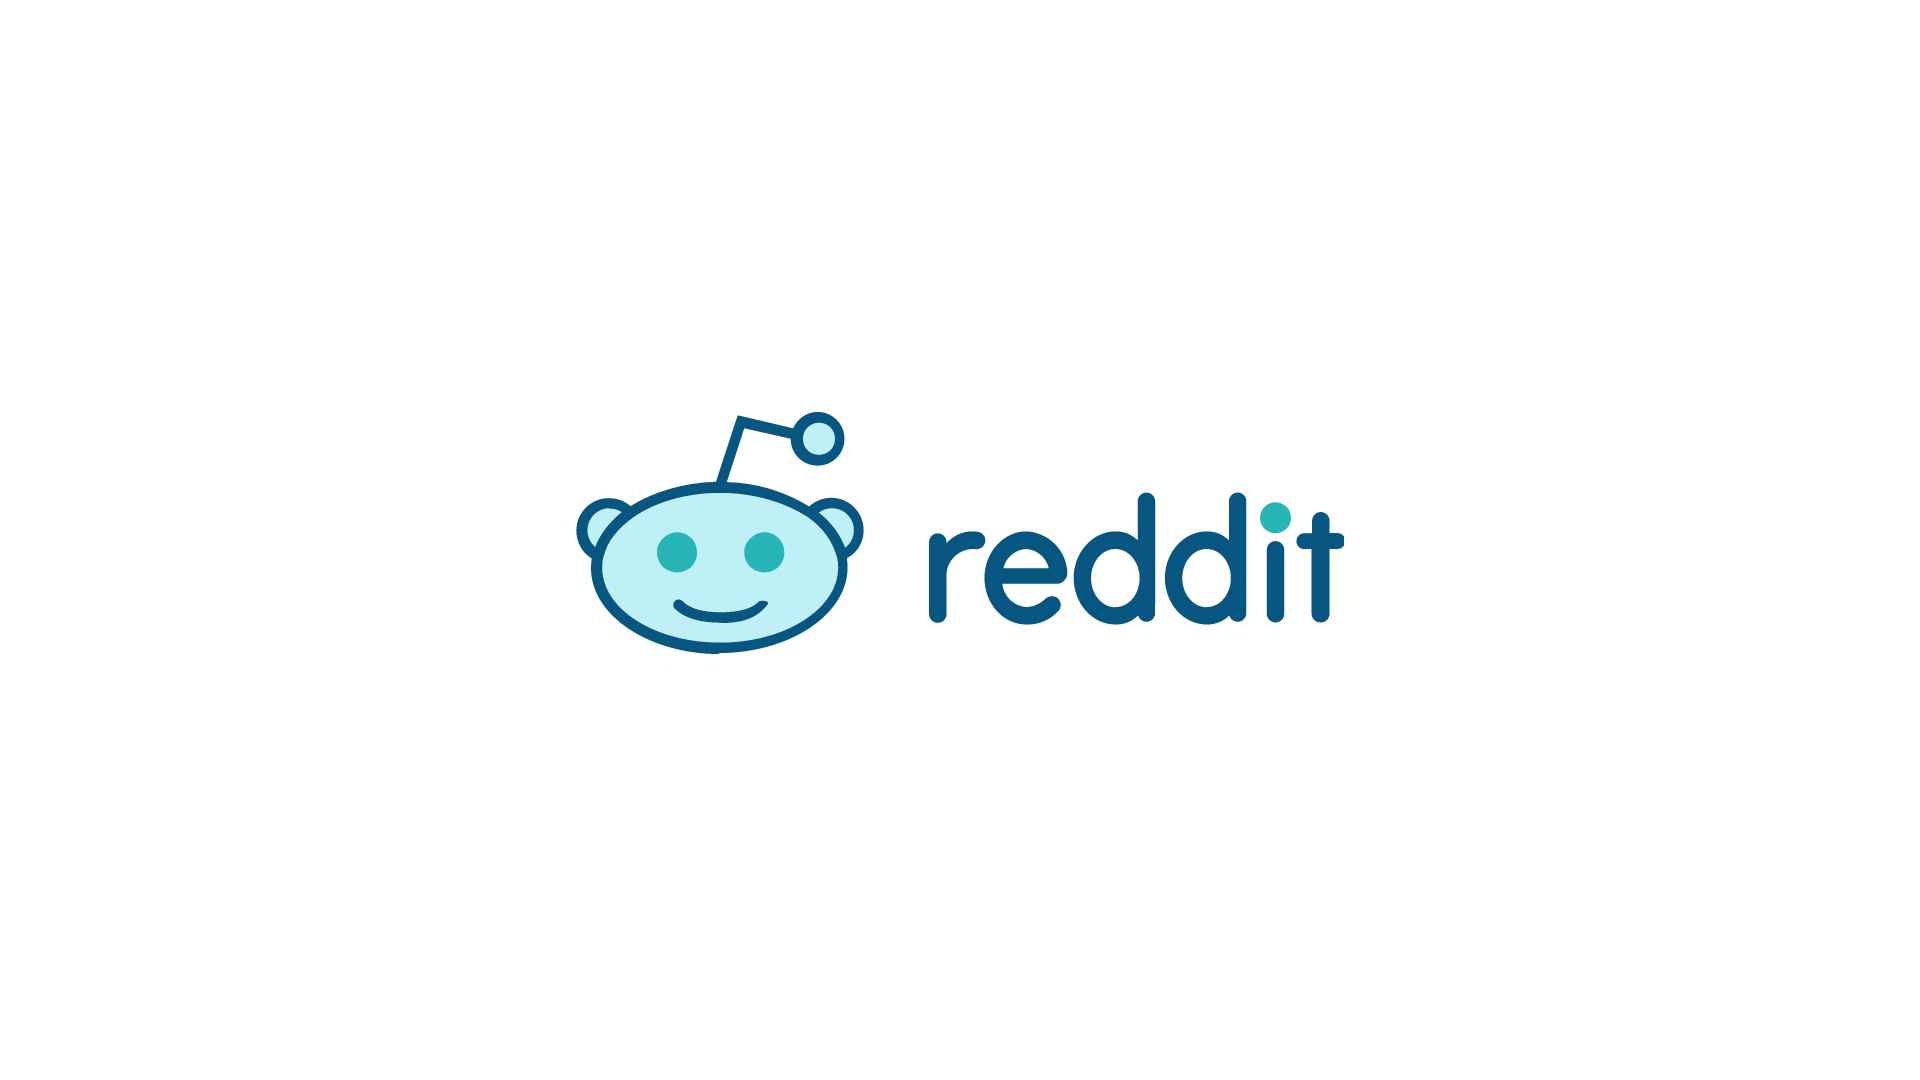 Can users save or bookmark posts or content on Reddit for later reference?